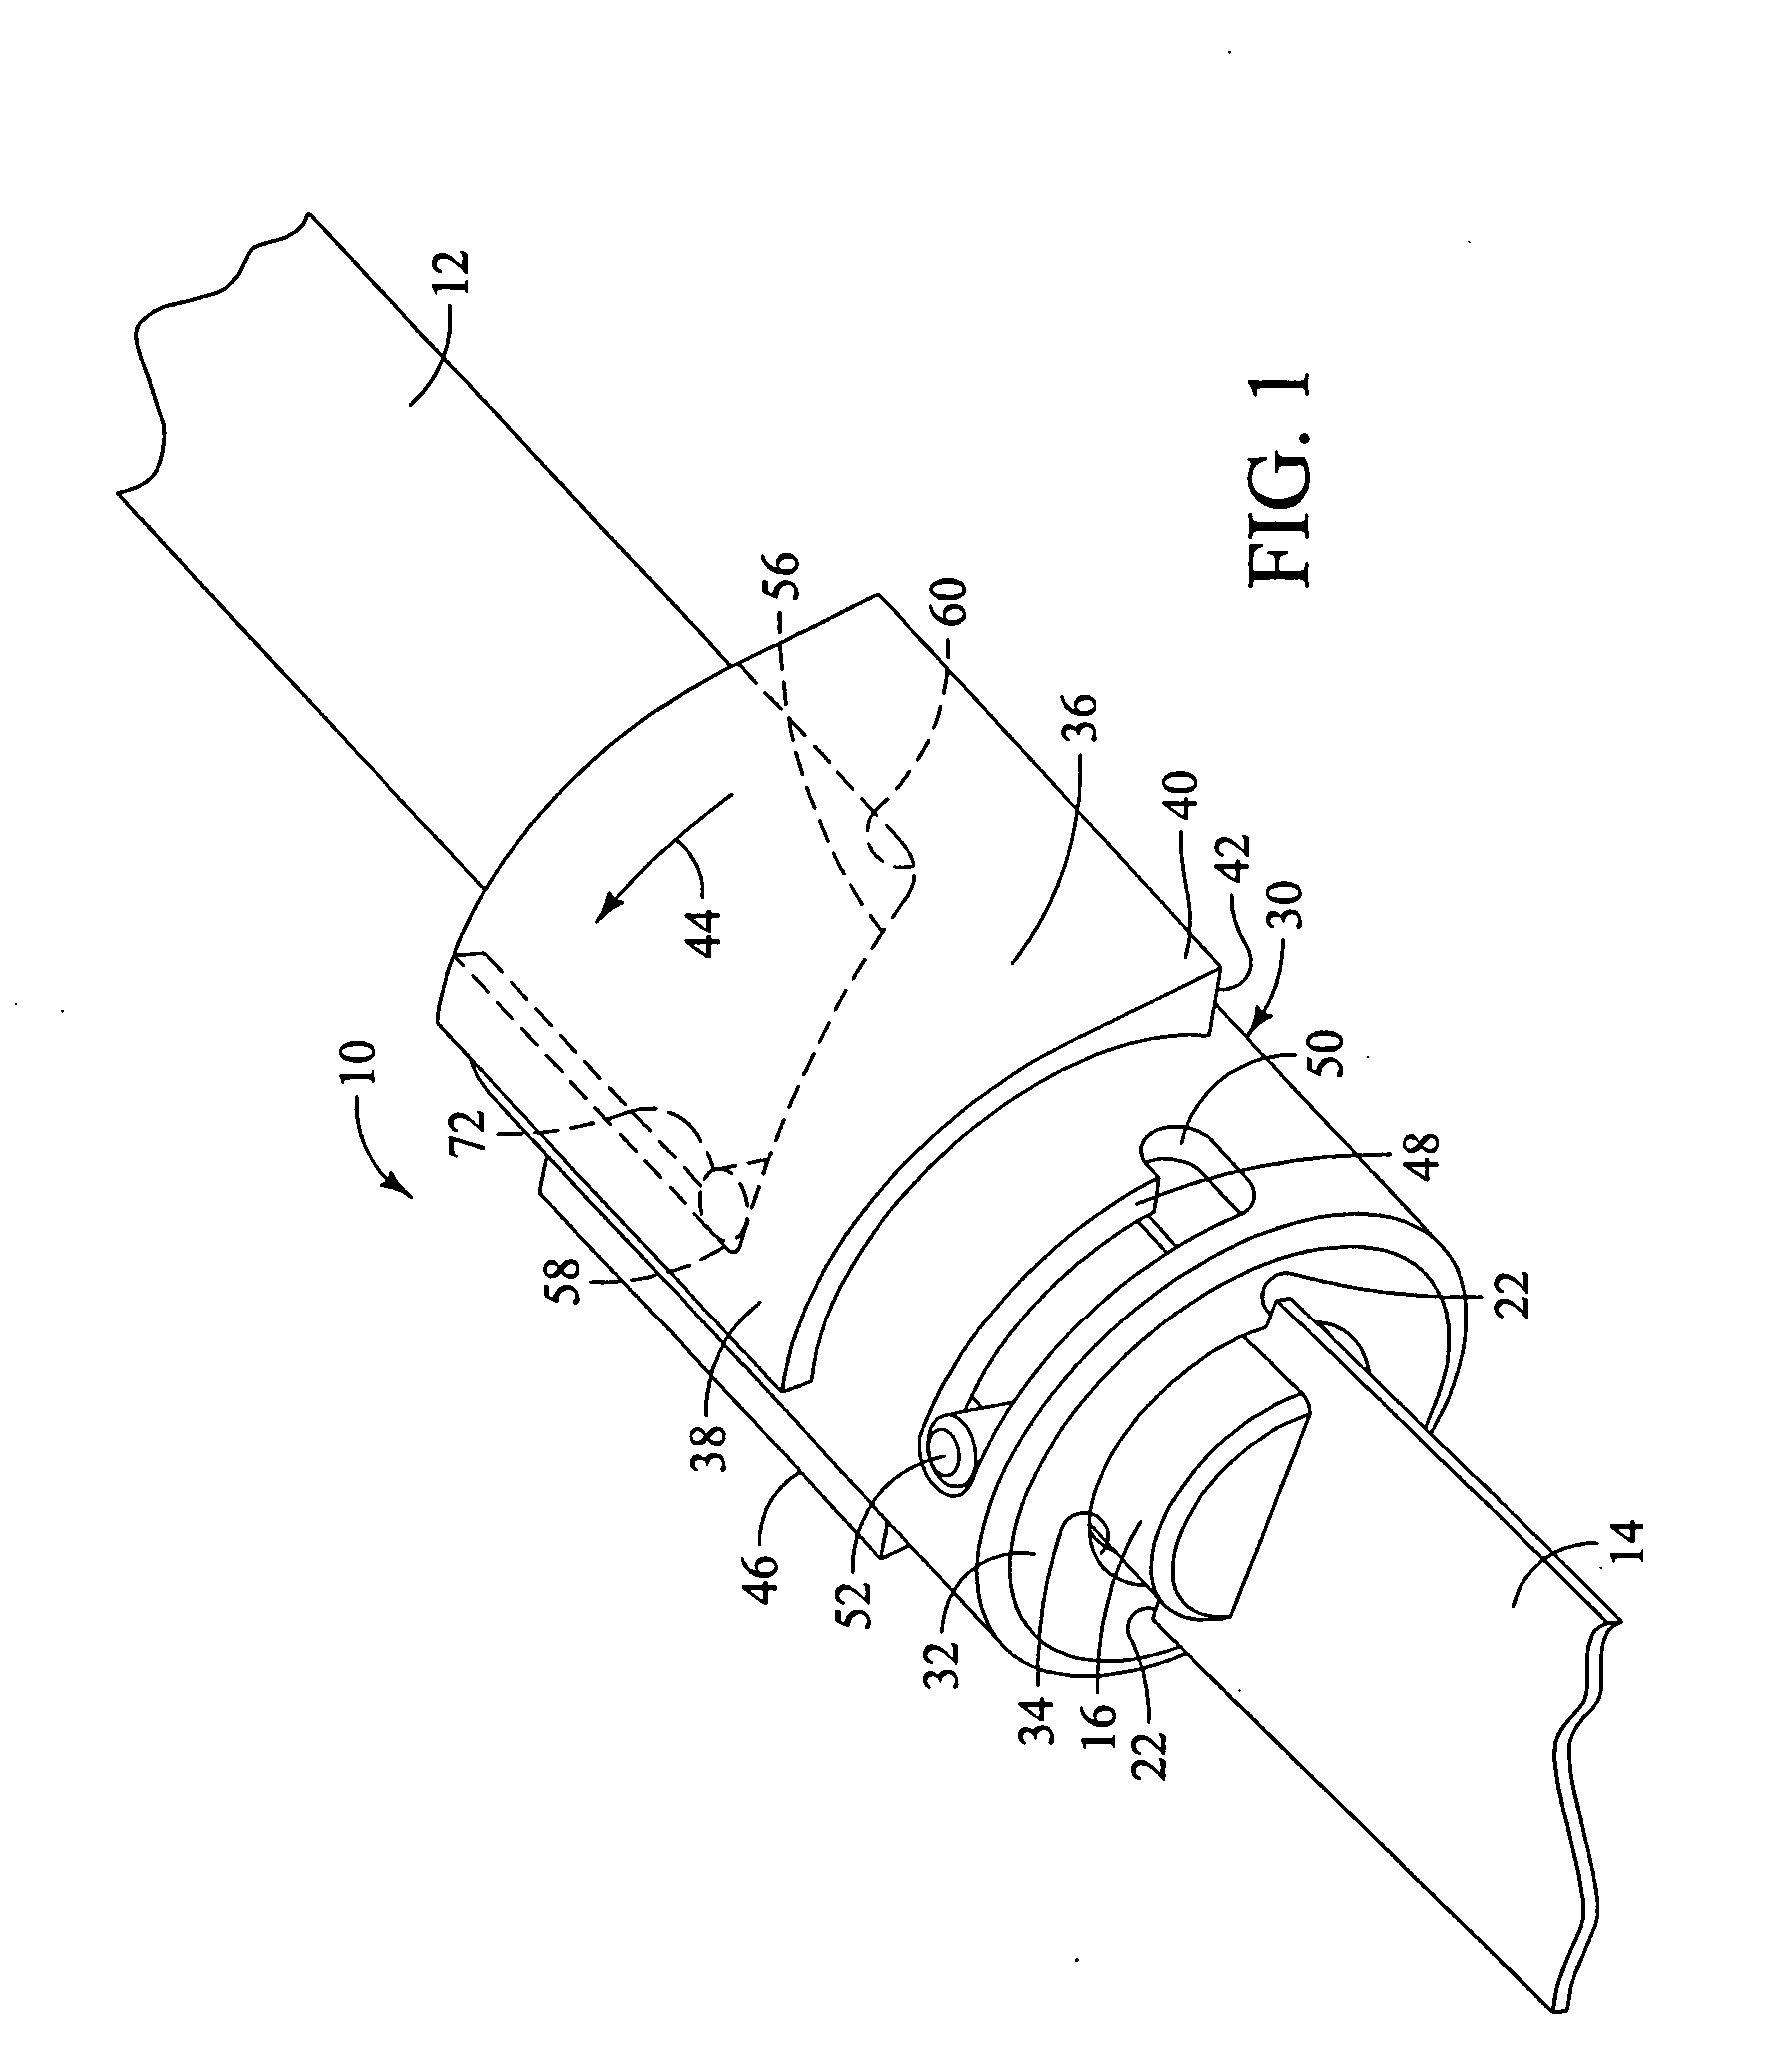 Tool-less blade clamping apparatus for a reciprocating tool